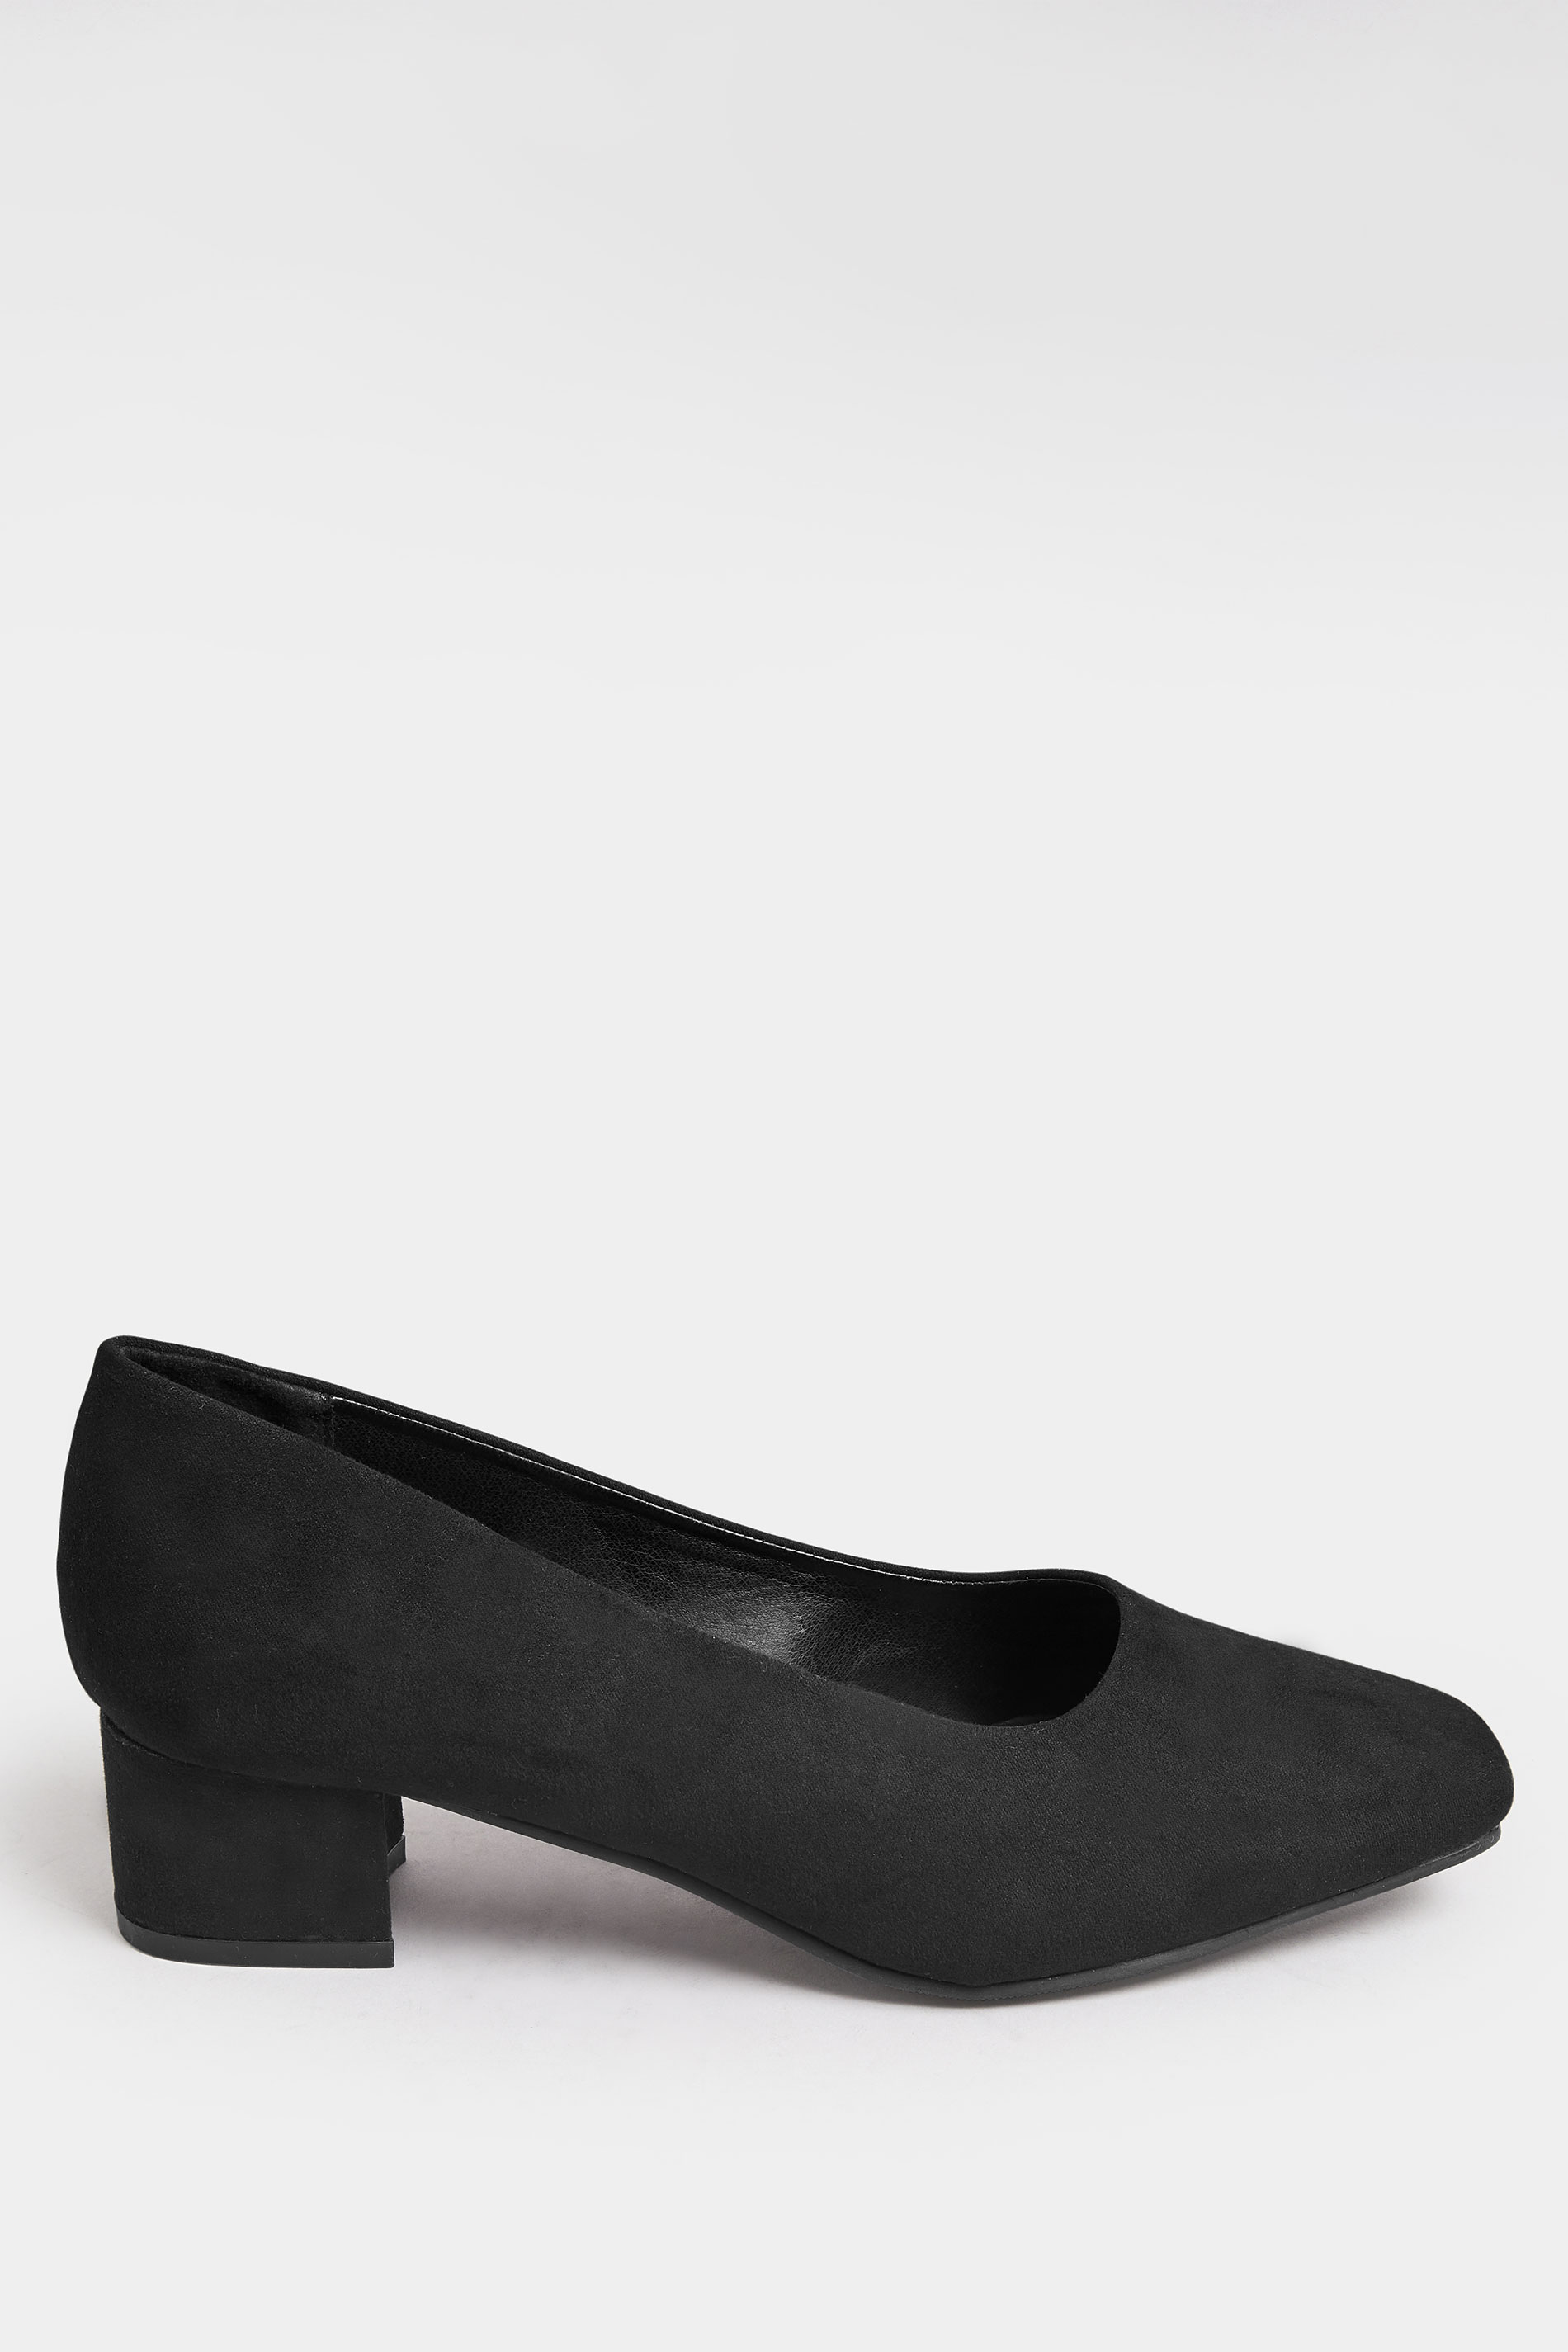 Black Faux Suede Block Heel Court Shoe In Extra Wide EEE Fit | Yours Clothing 3